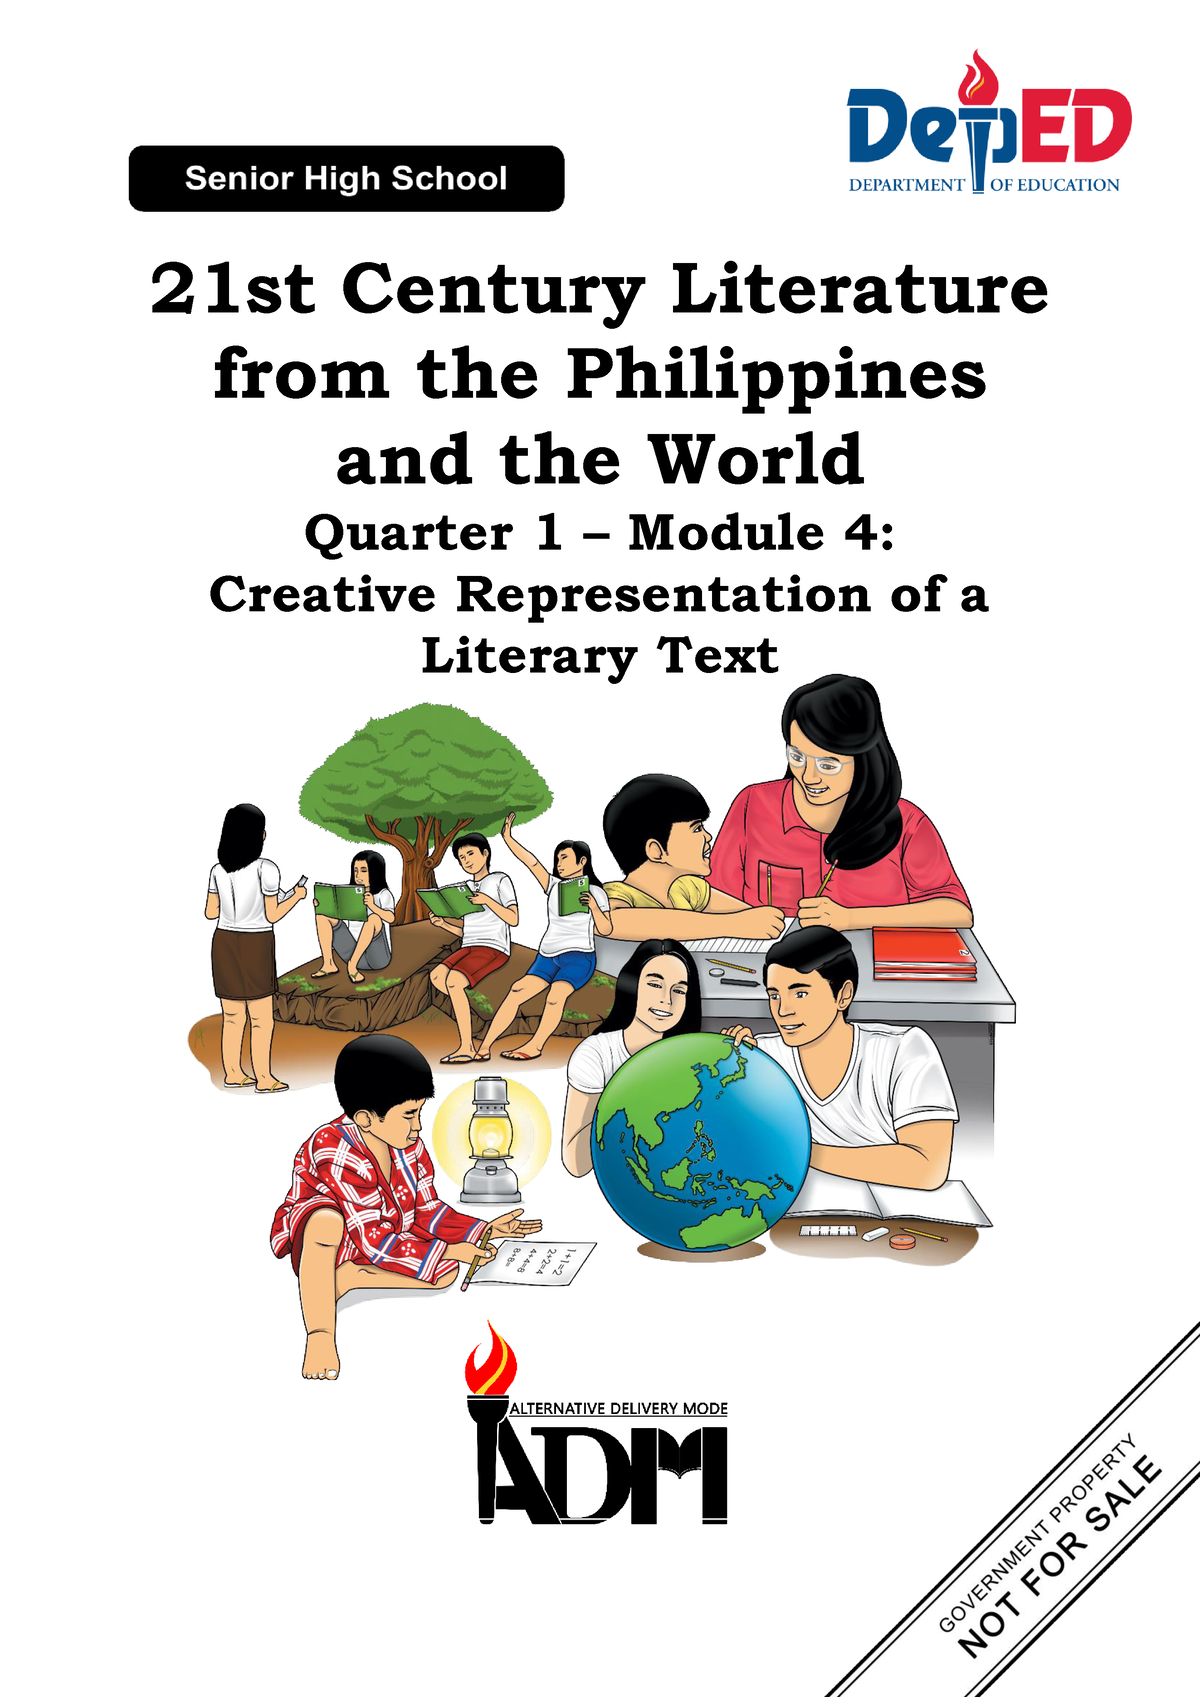 what is creative representation of literary text